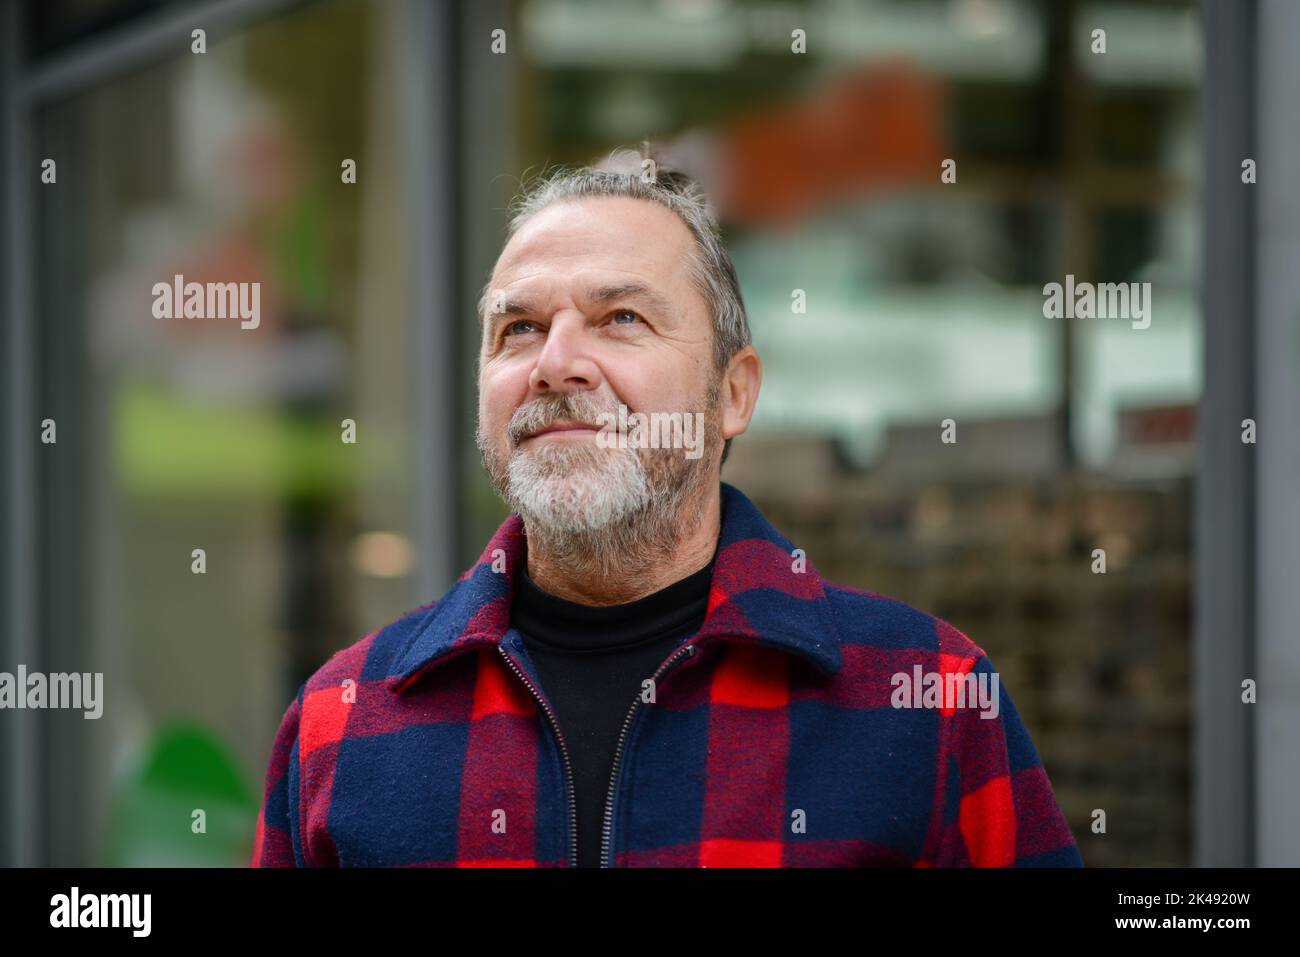 Middle aged man with a messy bun in a red and blue jacket in the style of a lumberjack stands in a shopping street Stock Photo